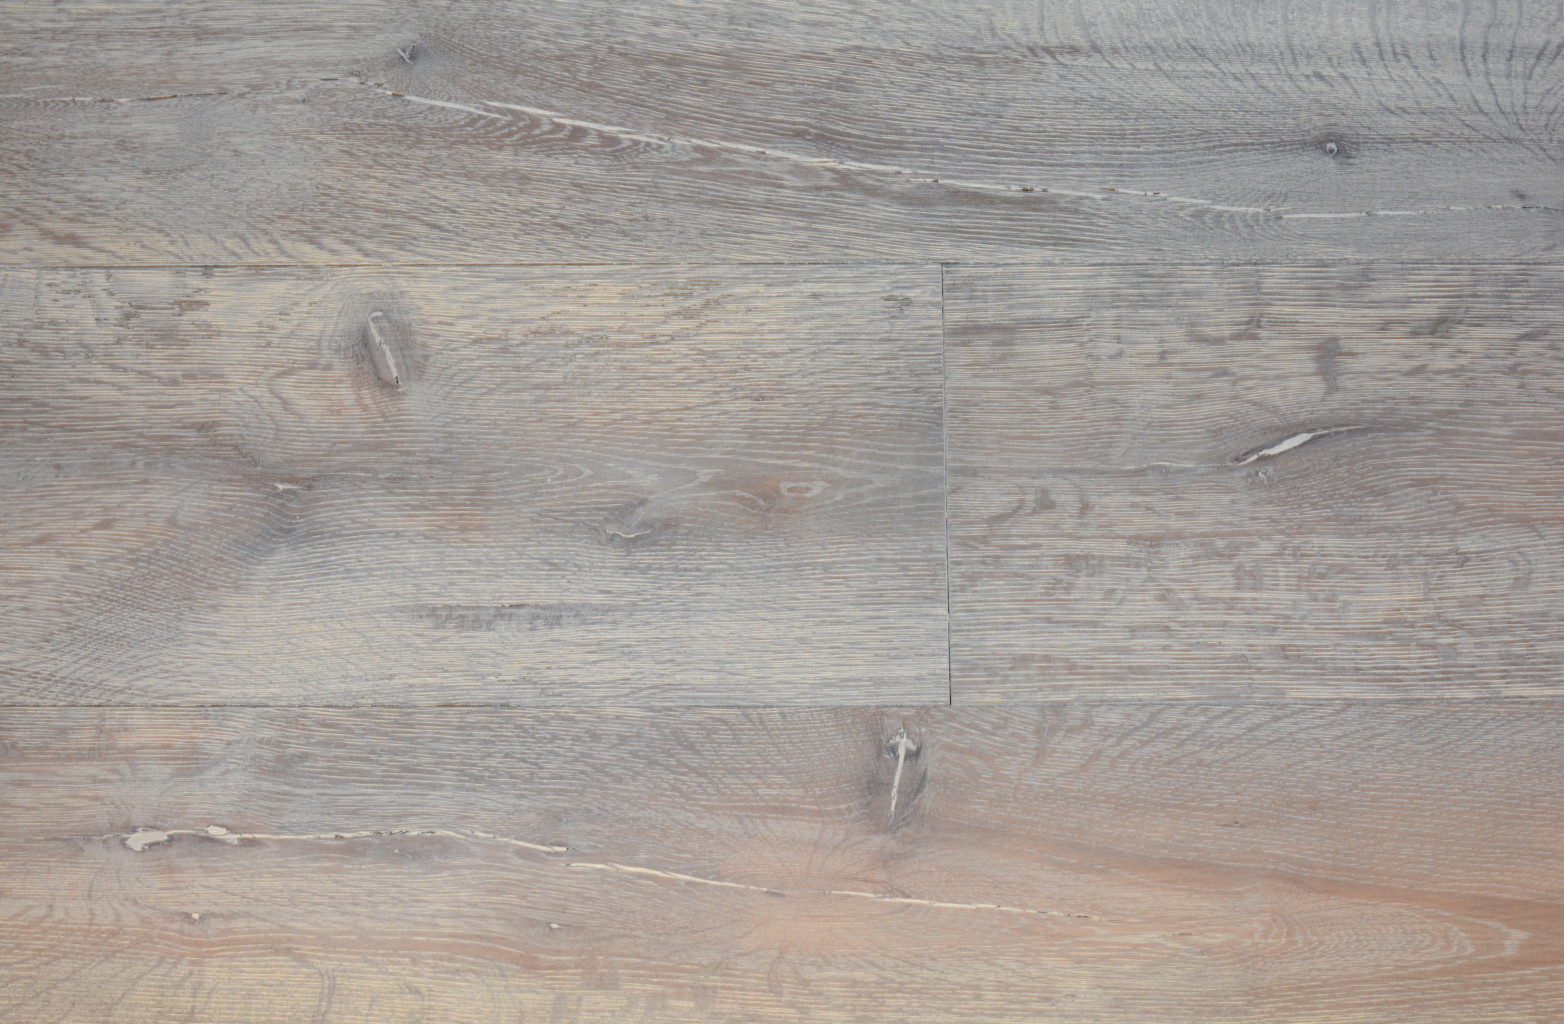 Using A Natural Oil Finish On Wide, Penetrating Oil Finish For Hardwood Floors